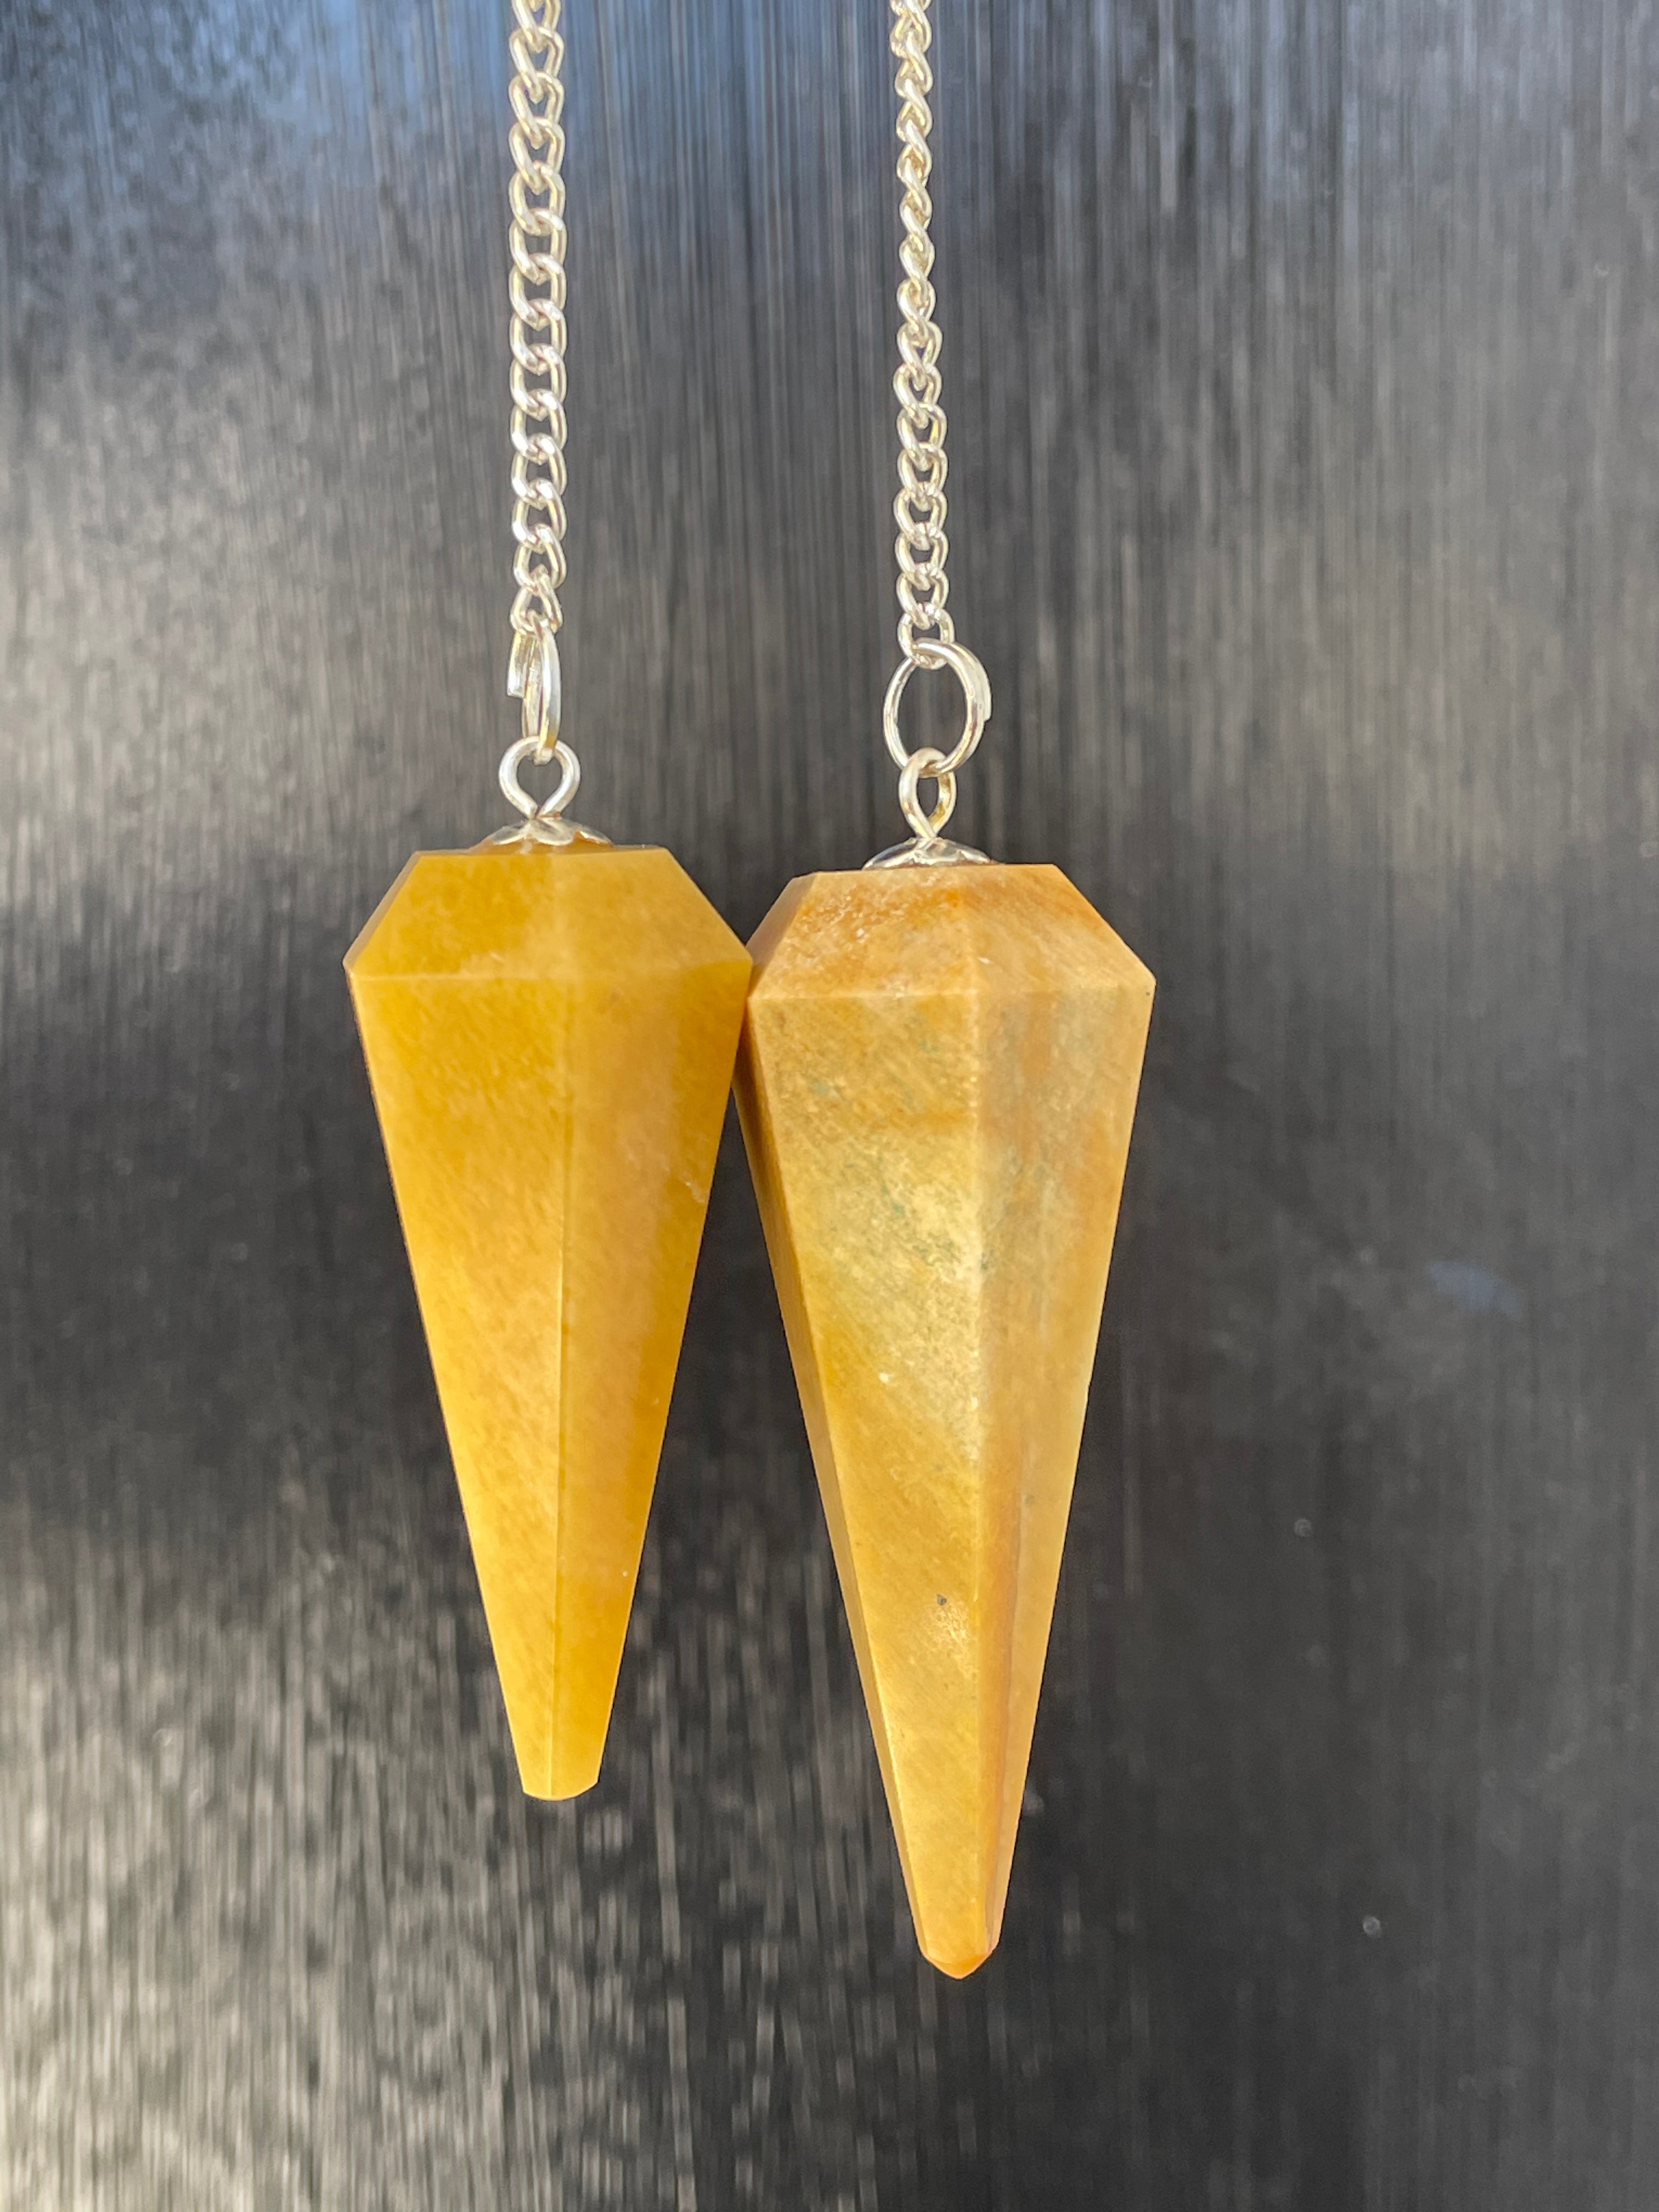 Pendulums for Divination